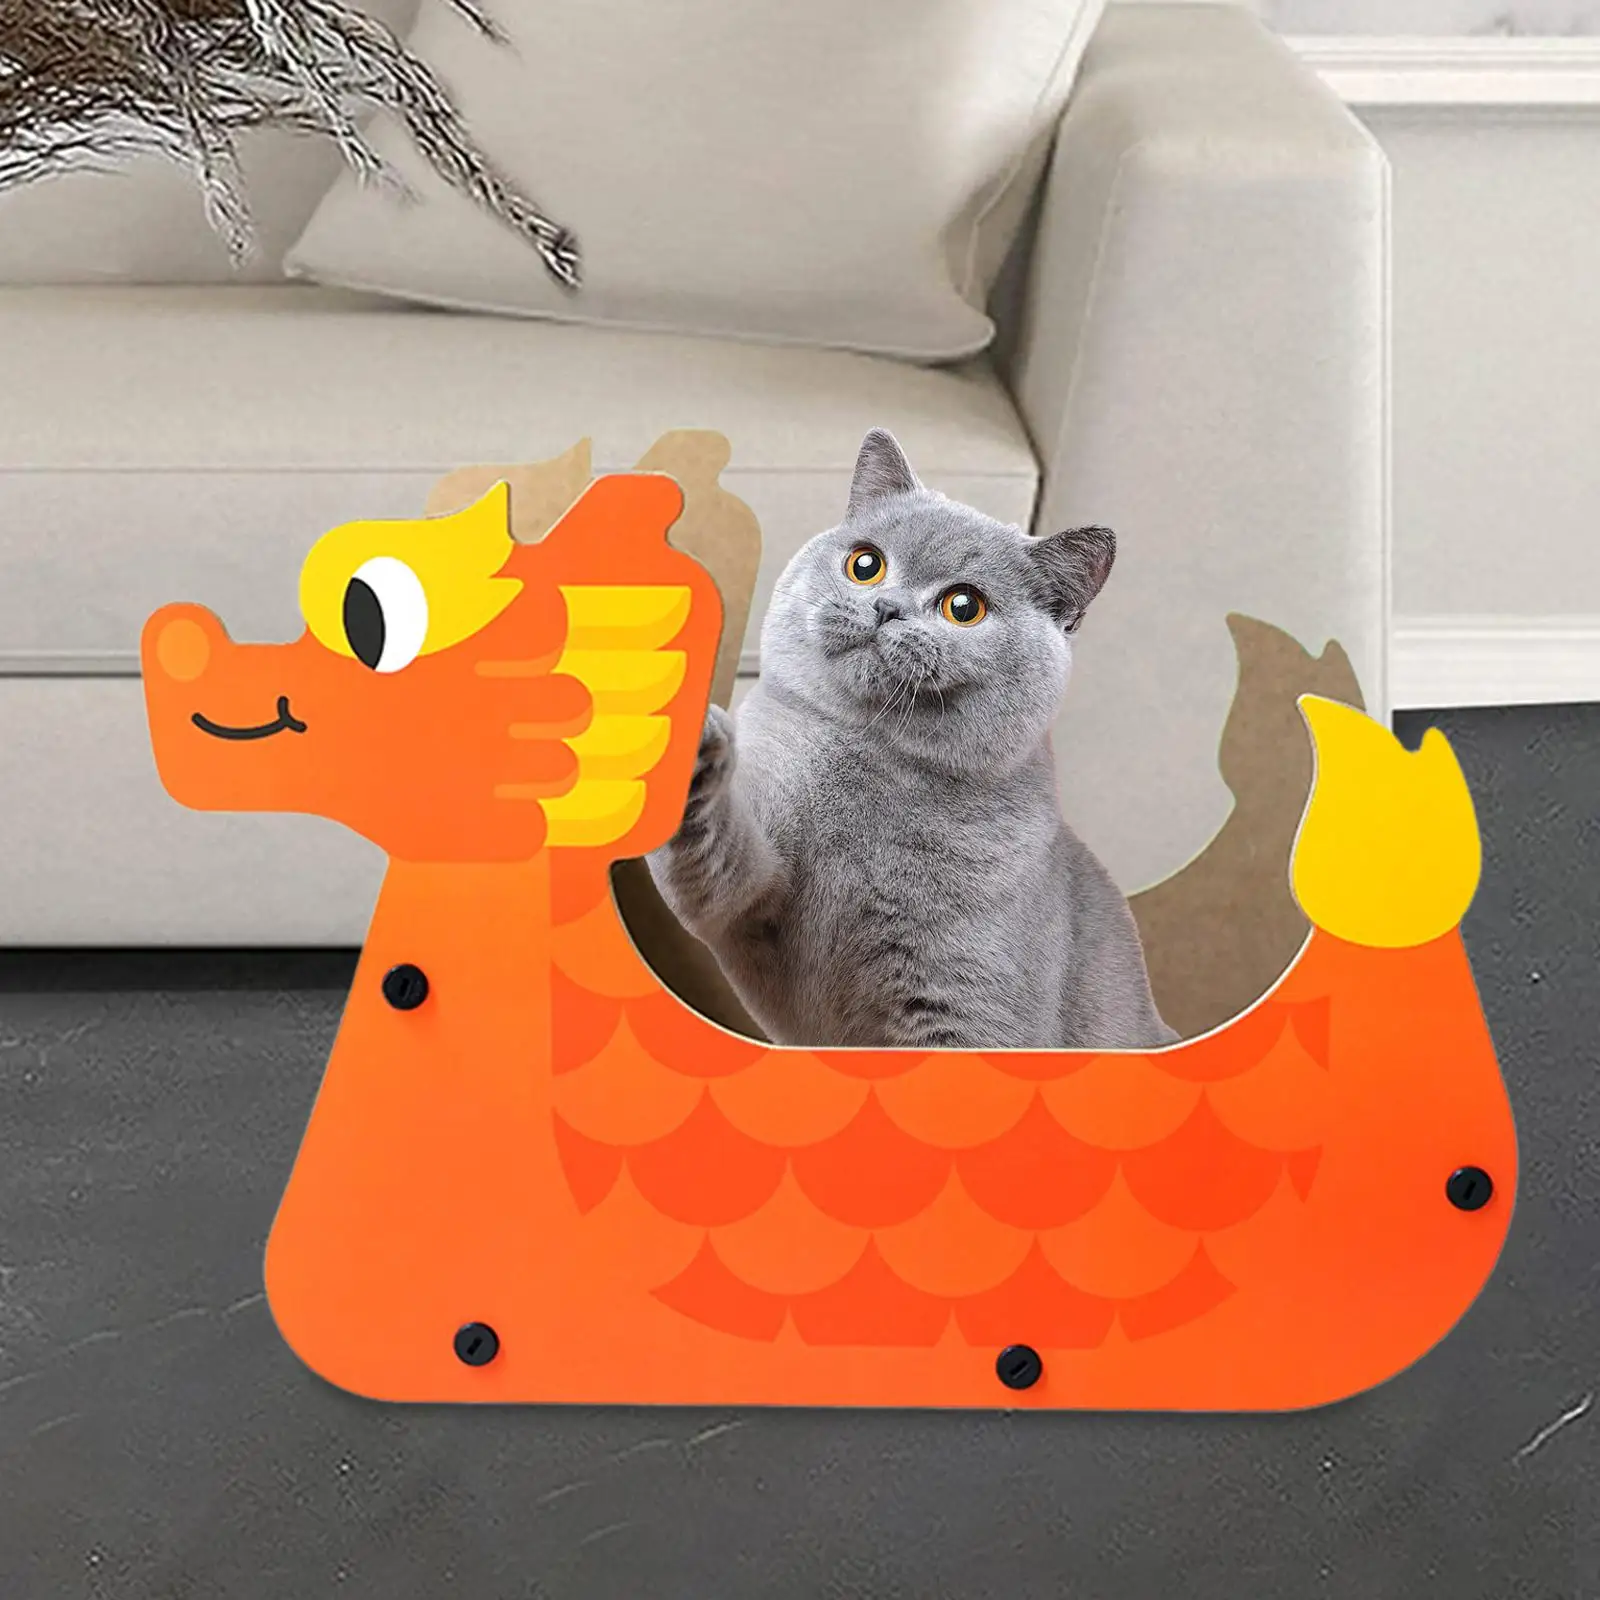 Cat Scratching Lounge Bed Pet Supplies Furniture Protection Durable Cat Scratching Couch for Sleeping Playing Cats Scratching